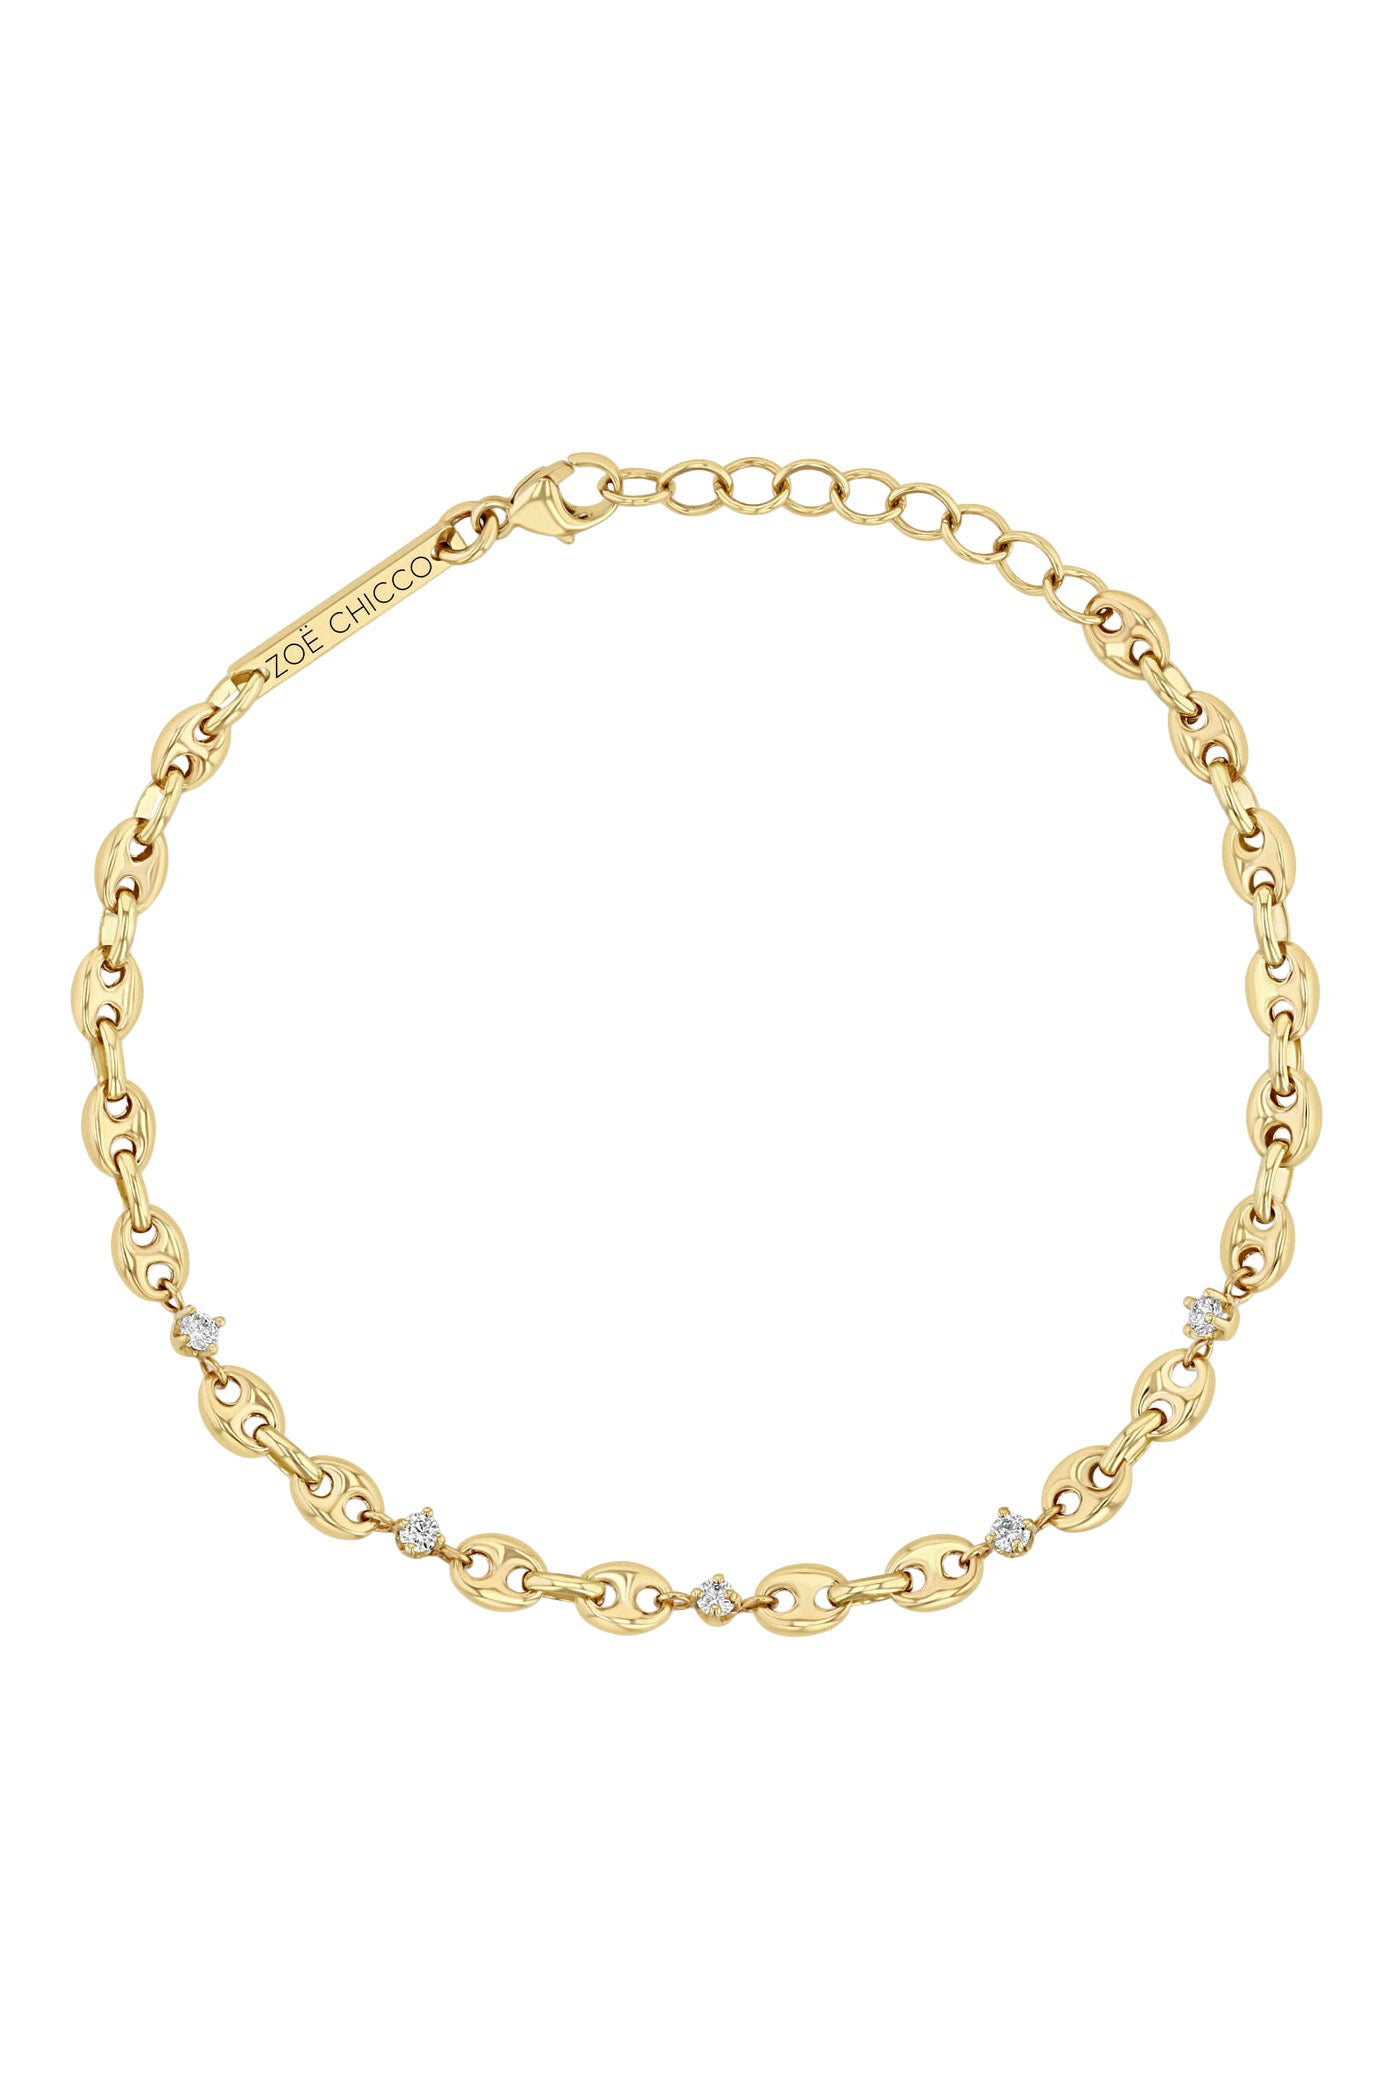 Zoe Chicco 5 Prong Diamond Small Puffed Mariner Chain Bracelet in 14k Yellow Gold